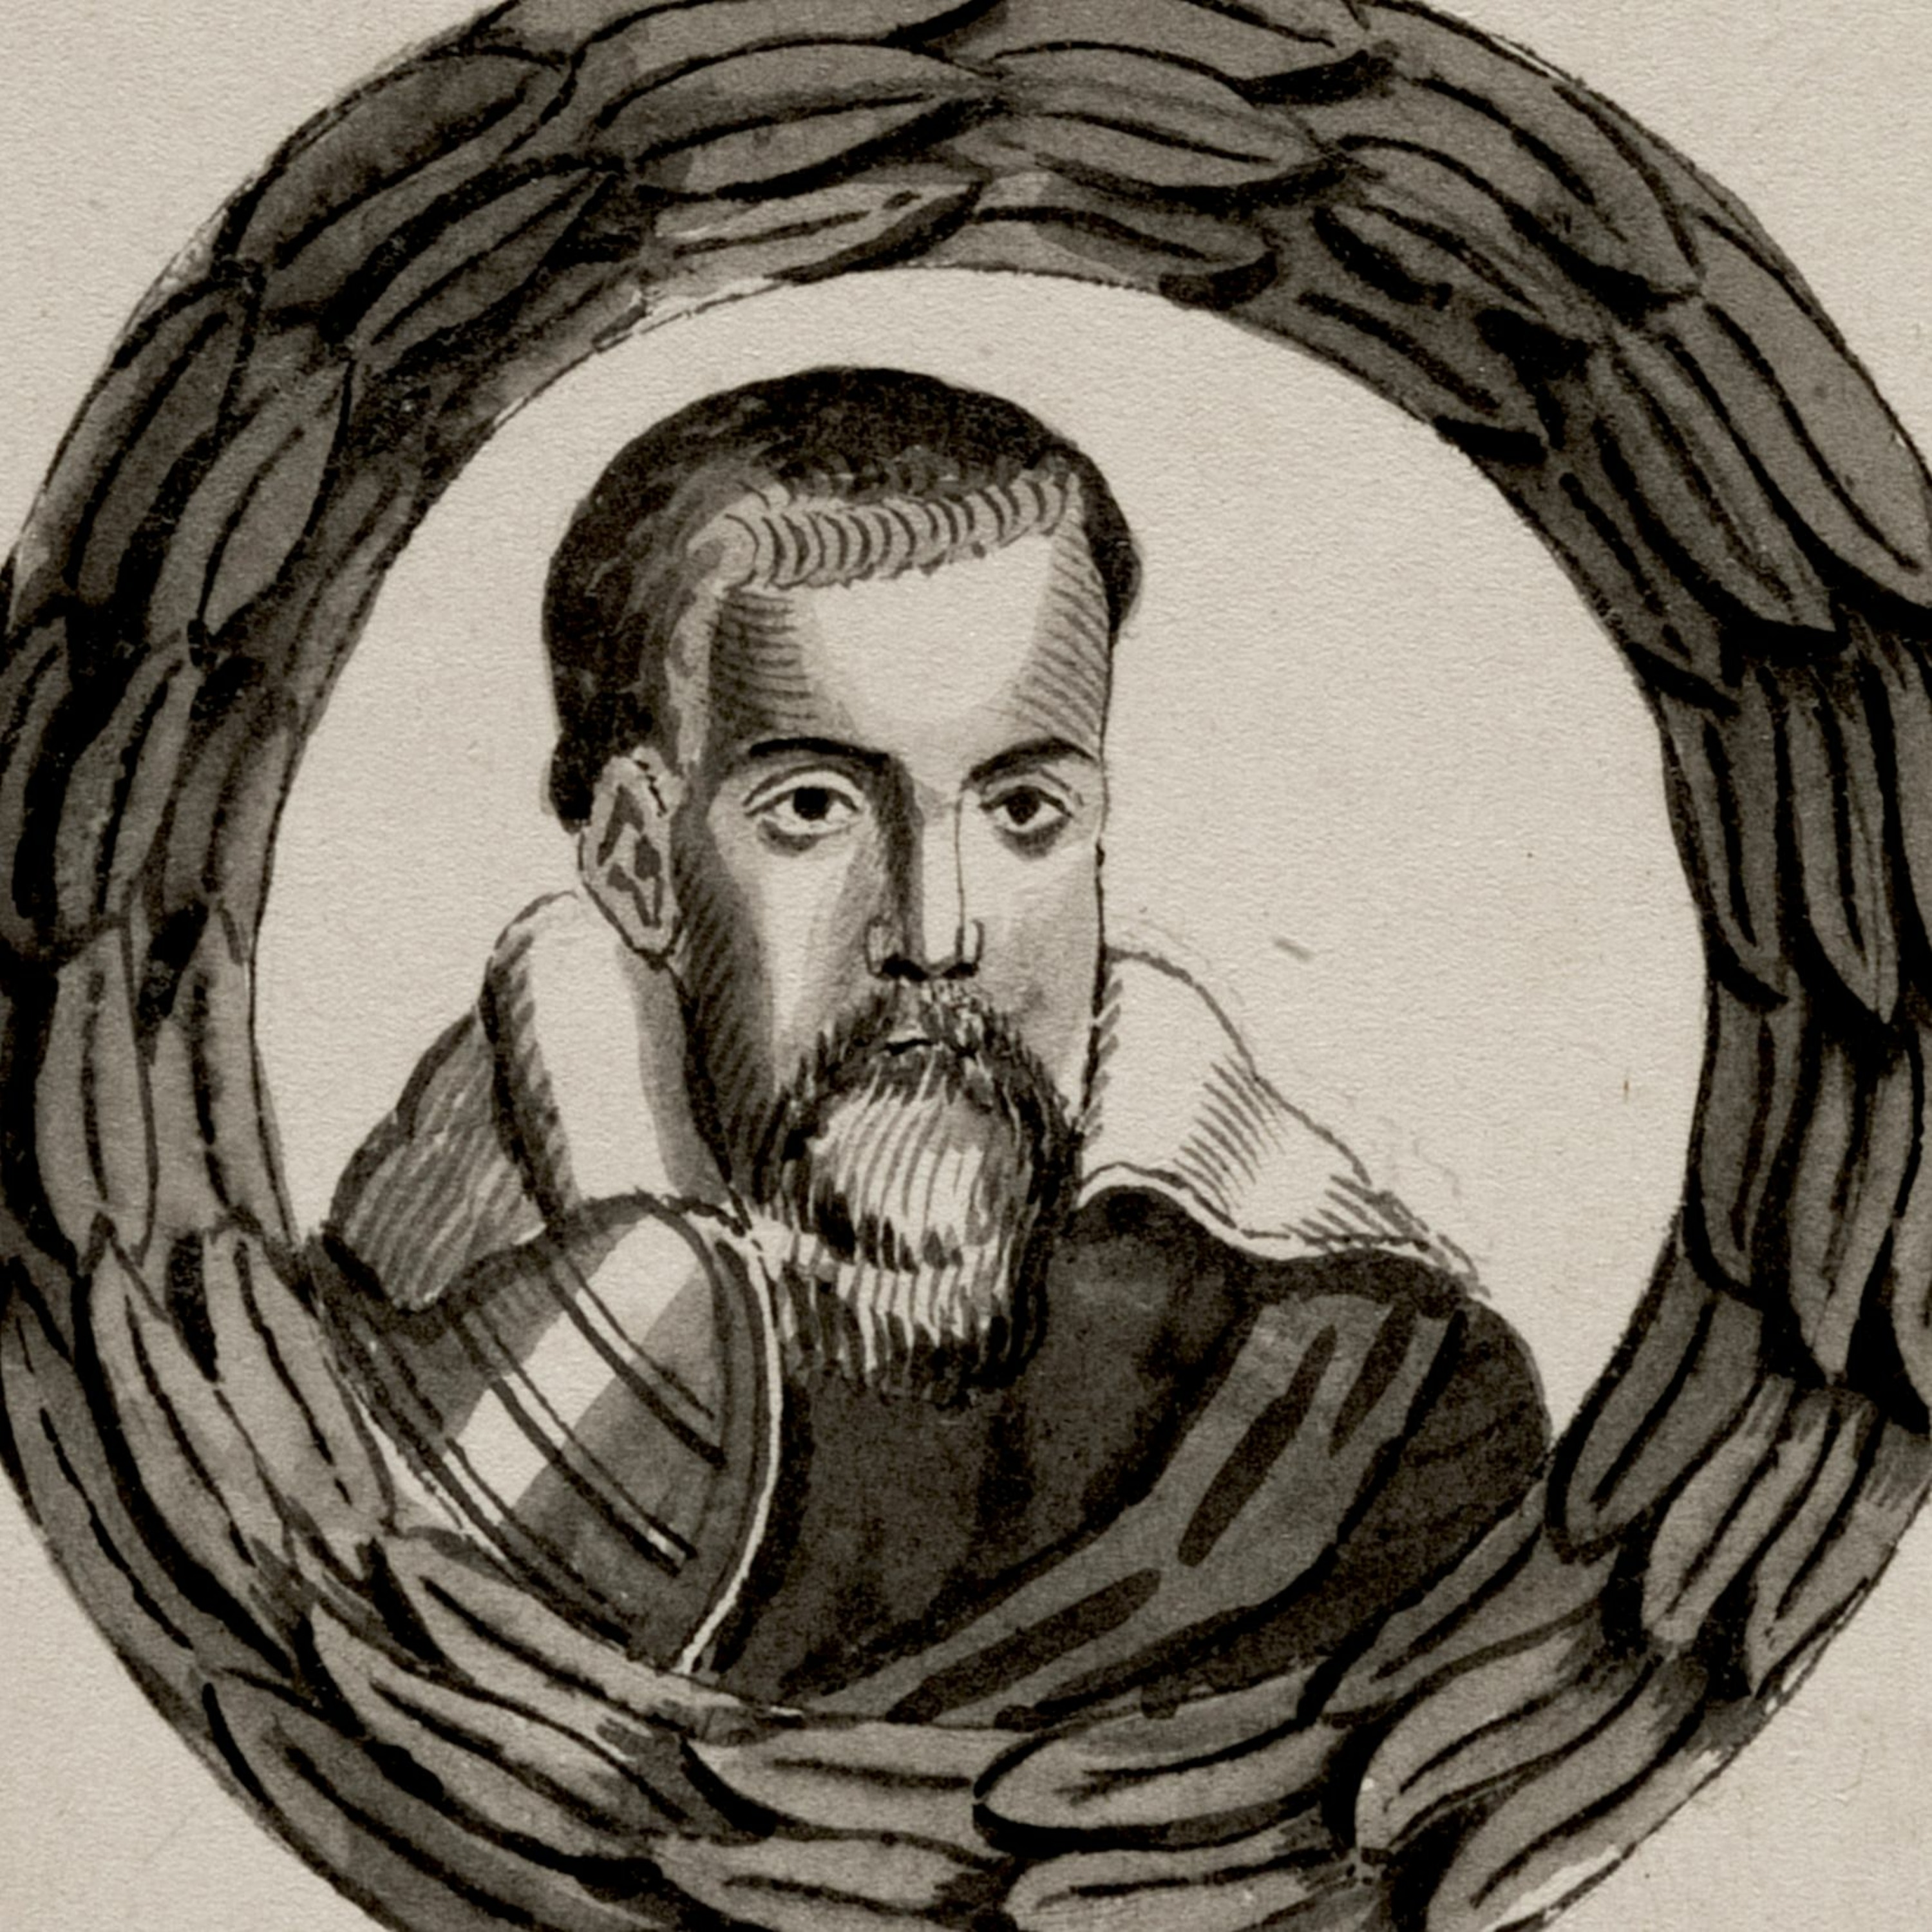 “Ourselves alone”:  winning and losing in 1598